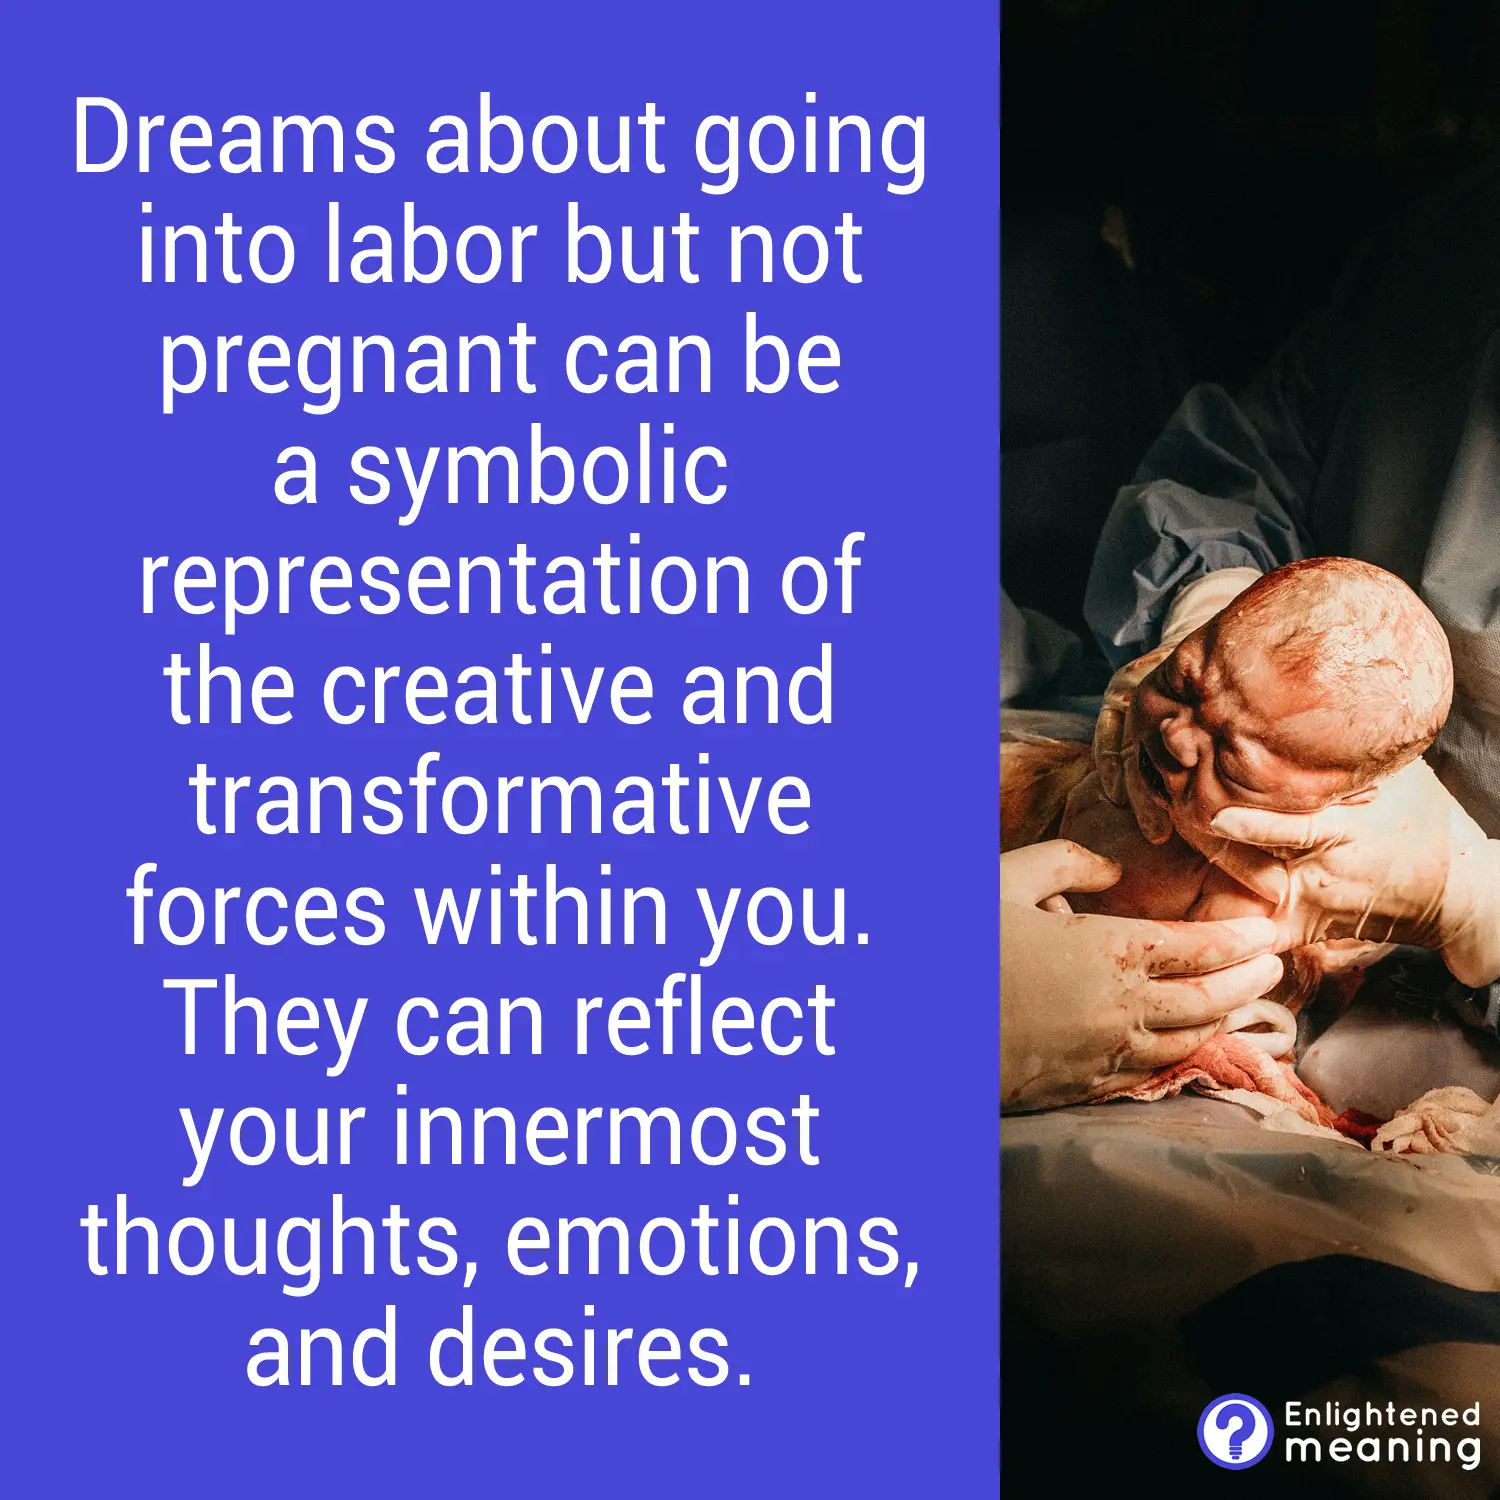 What is the meaning of dreams about going into labor but not pregnant